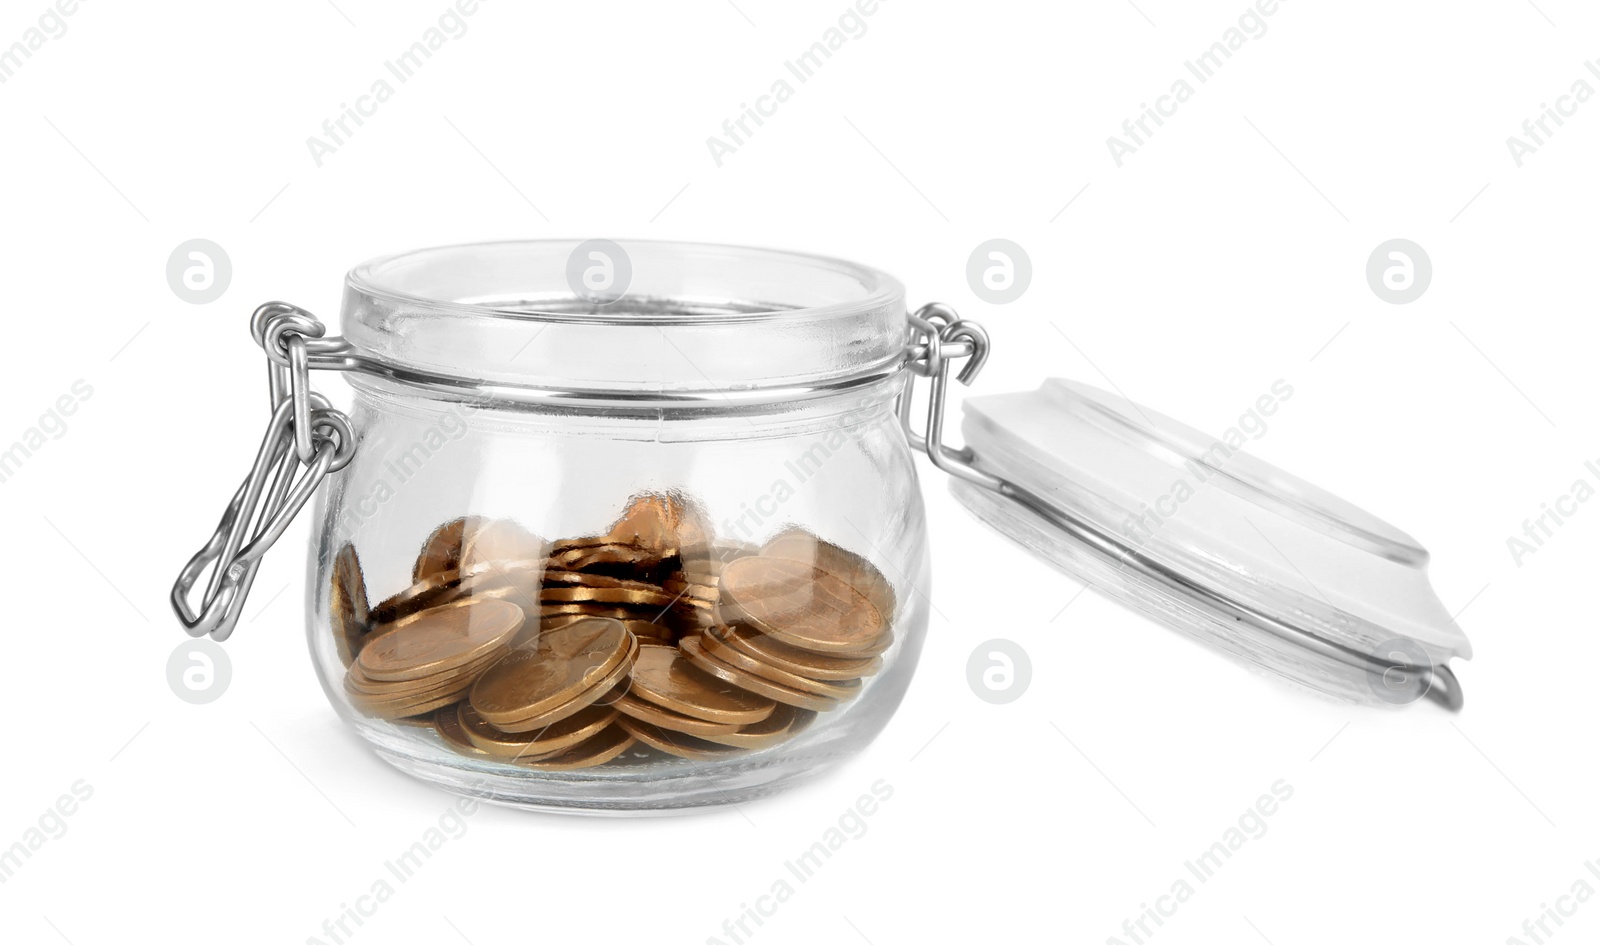 Photo of Glass jar with coins isolated on white